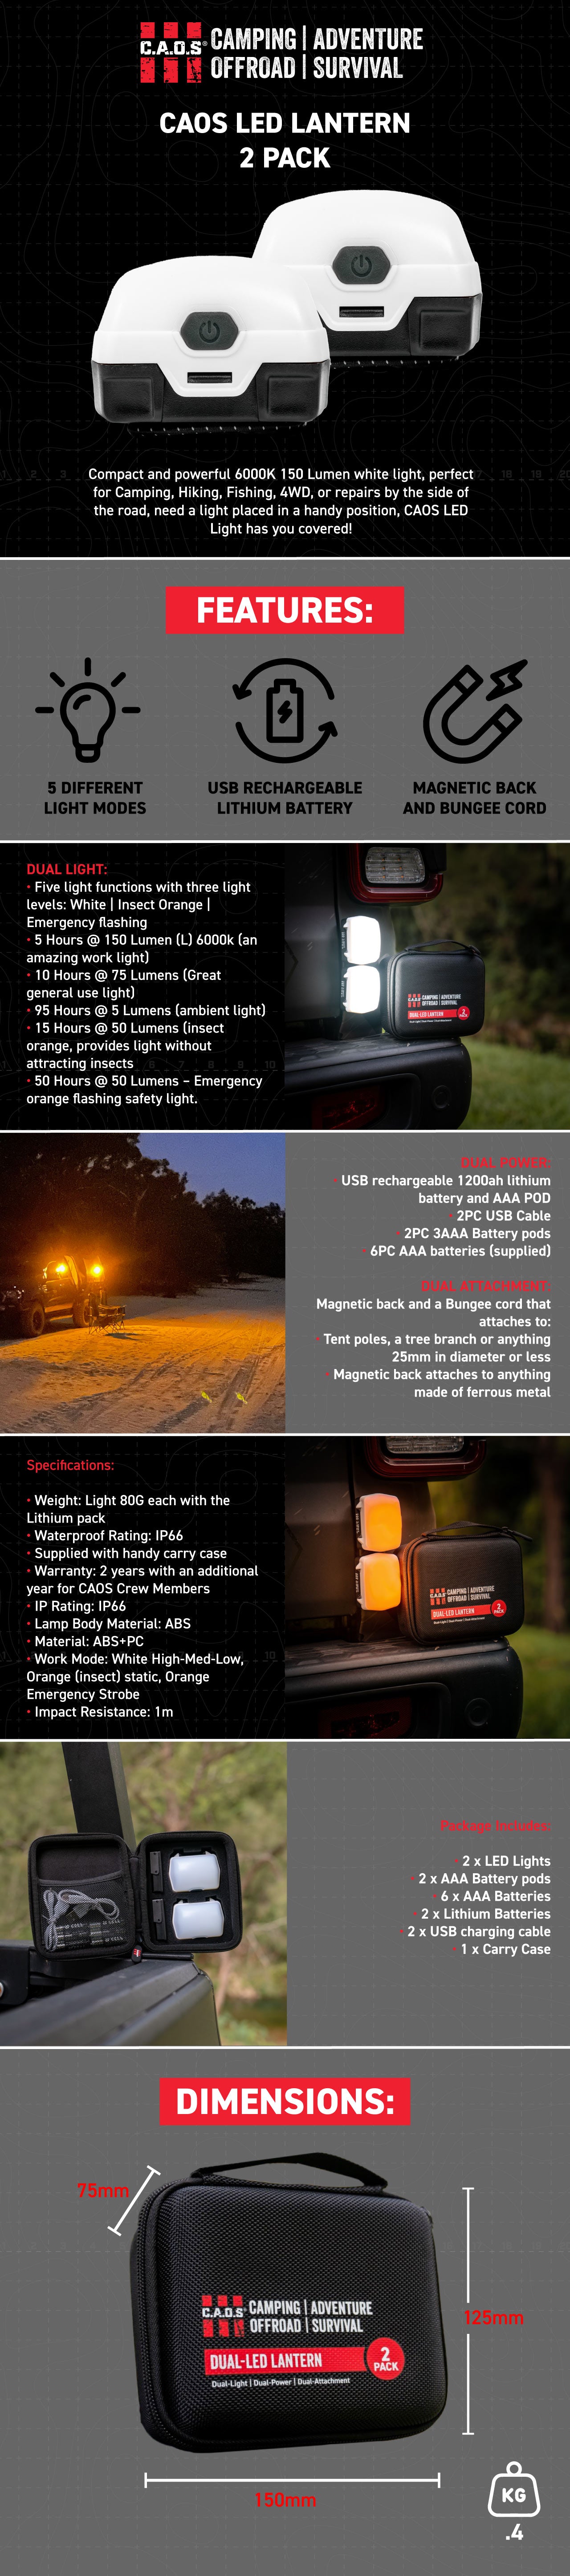 Compact and powerful 6000K 150 Lumen white light, perfect for Camping, Hiking, Fishing, 4WD, or repairs by the side of the road, need a light placed in a handy position, CAOS LED Light has you covered! 